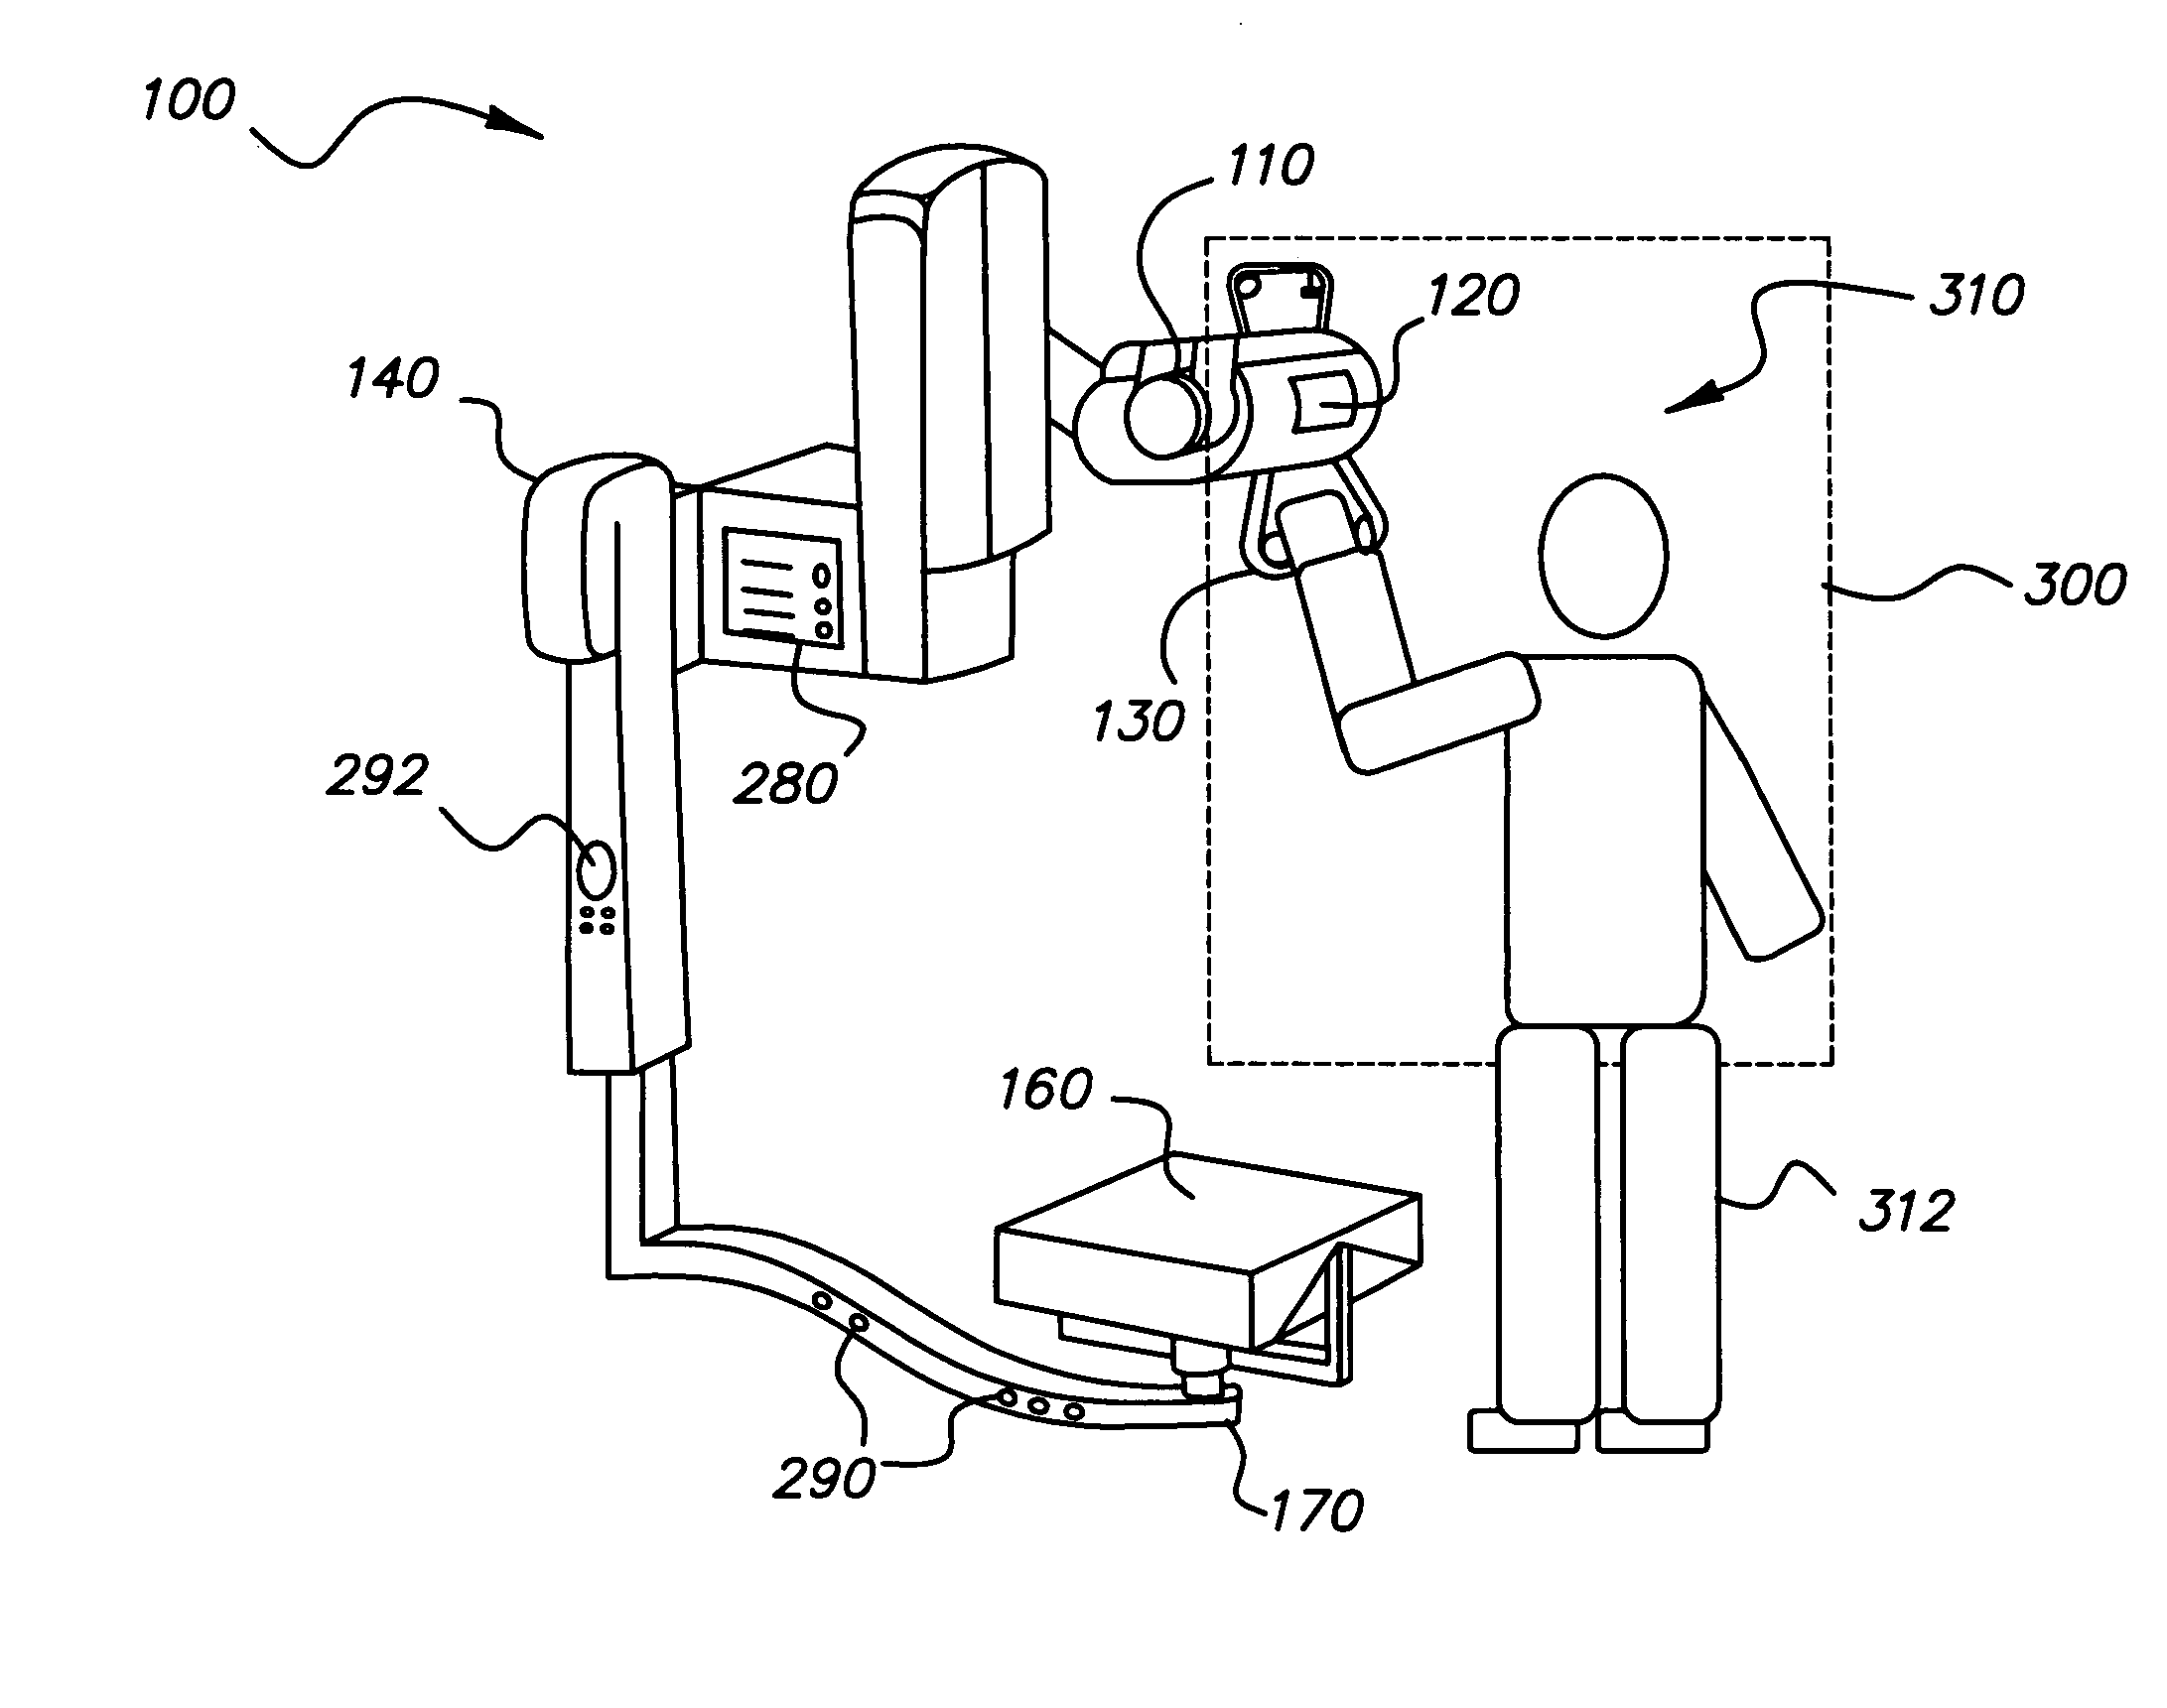 Radiography apparatus with multiple work zones